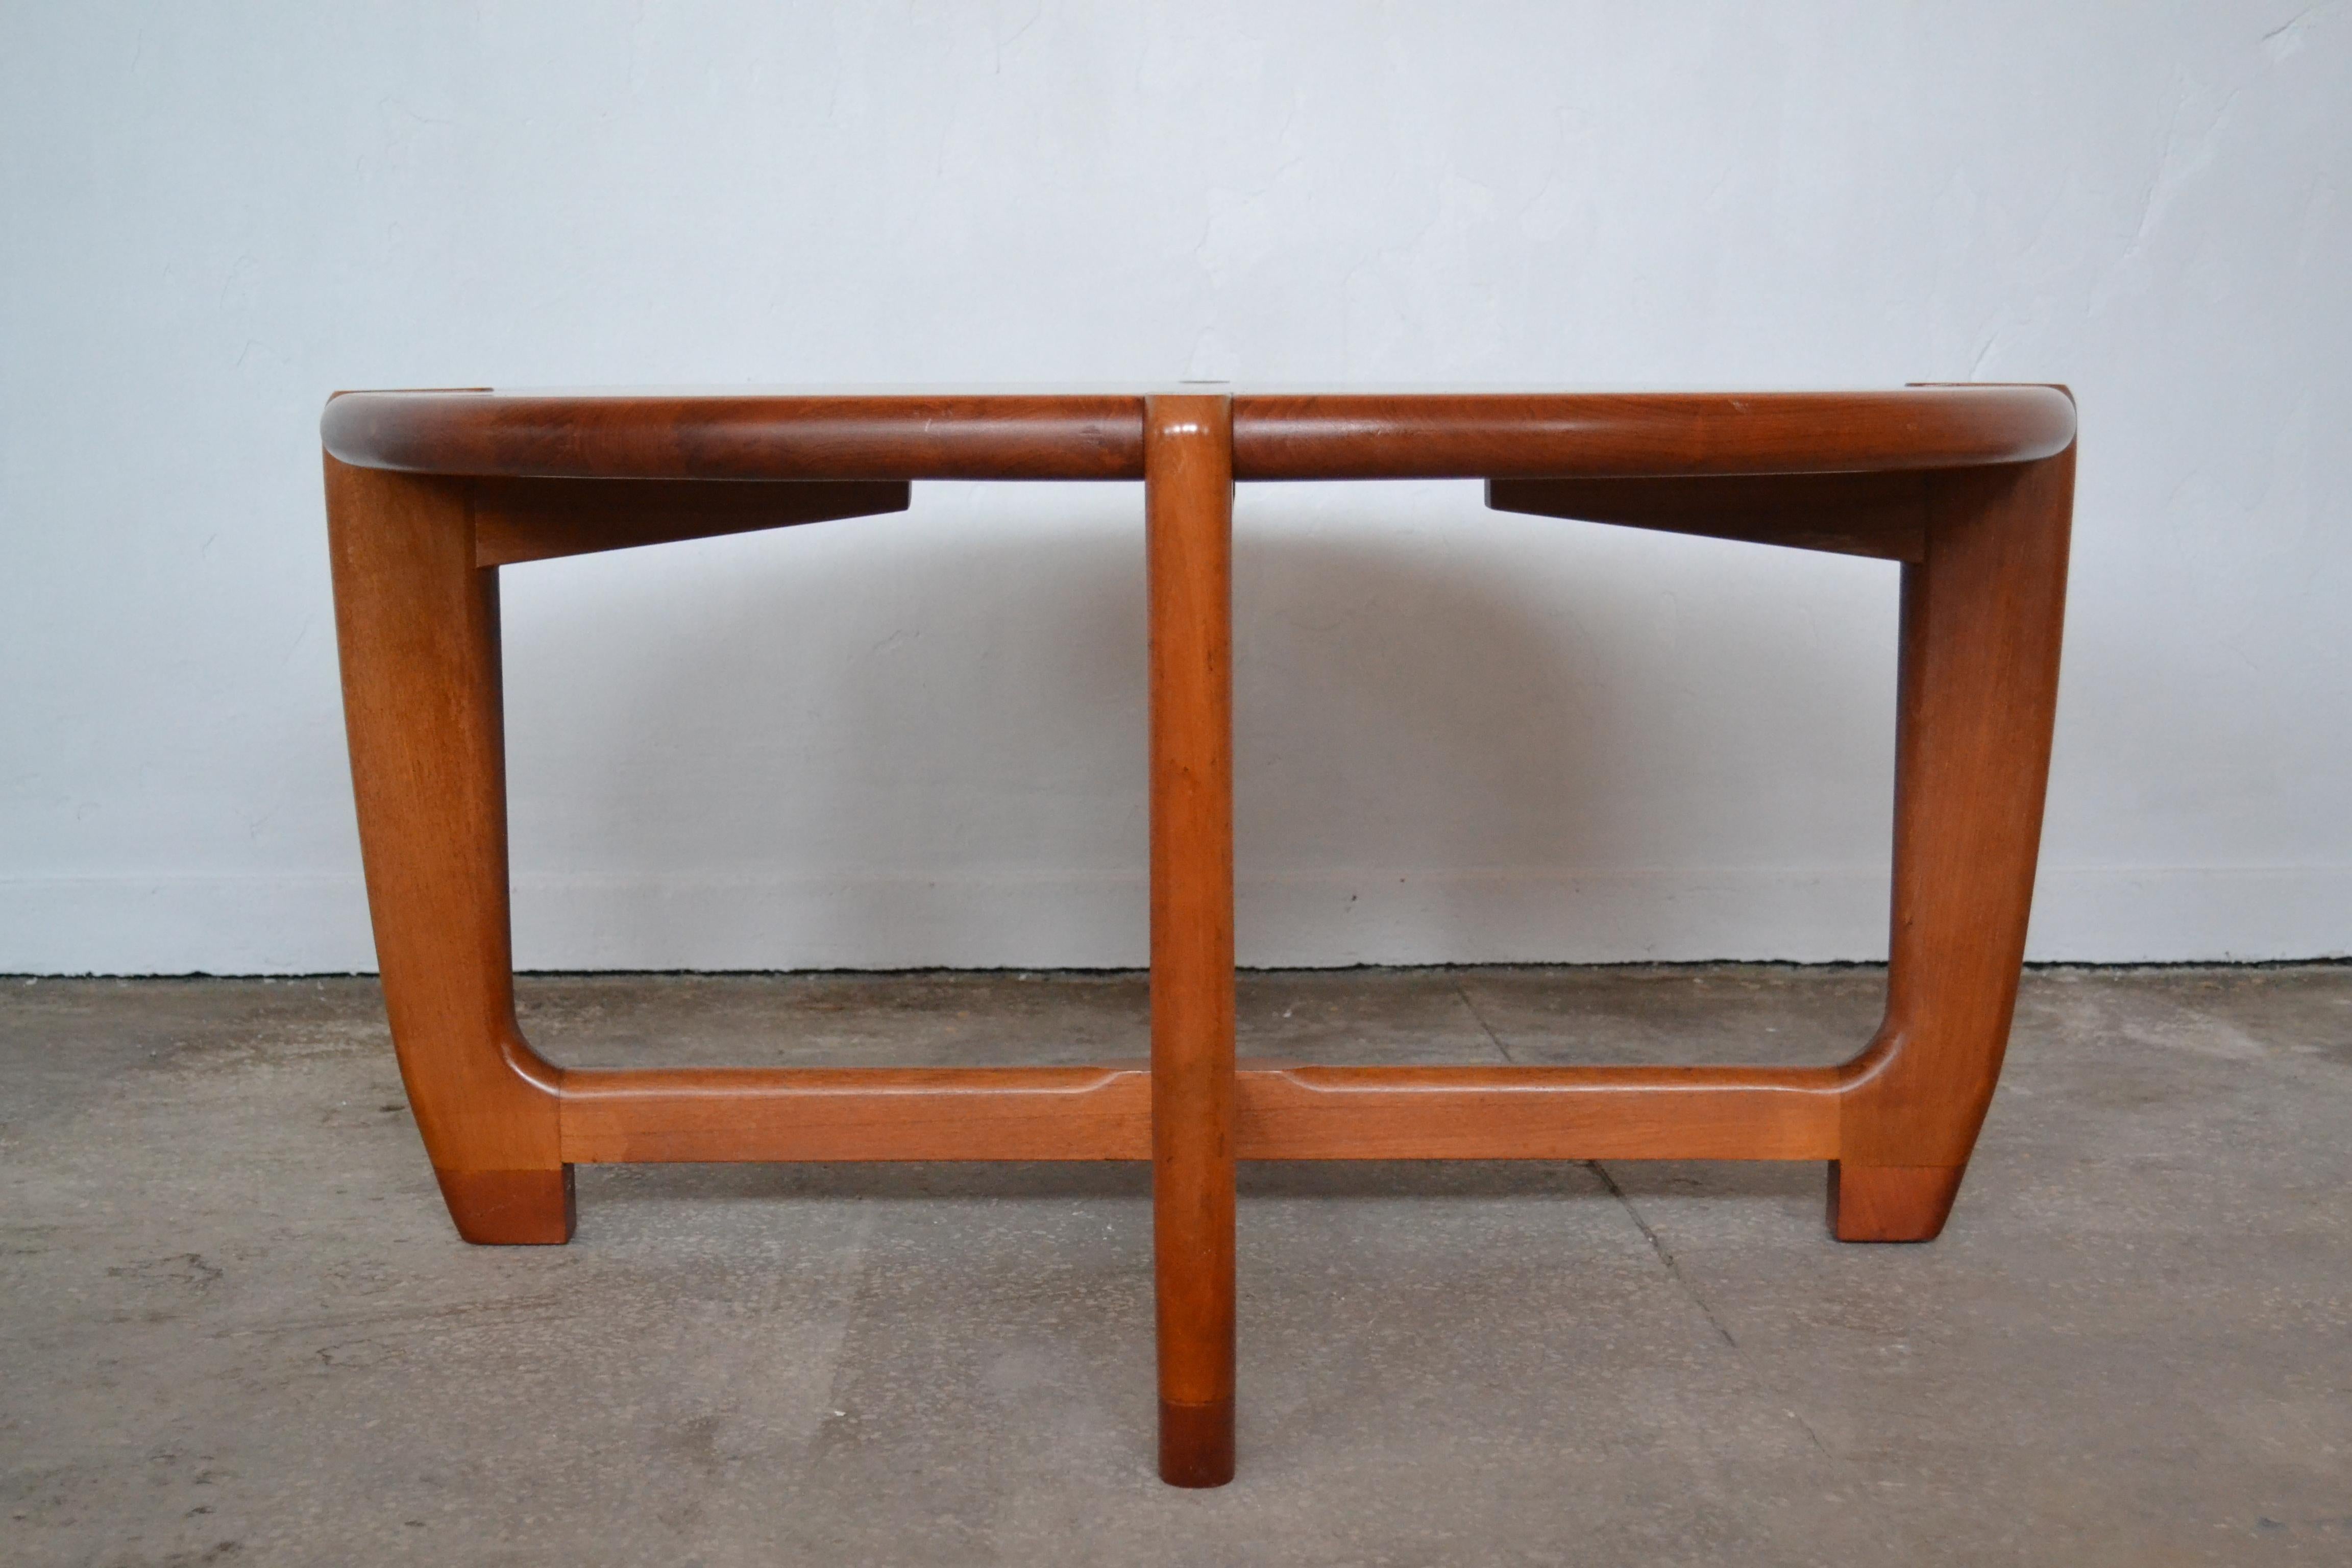 This large solid teak coffee table was designed by Niels Eilersen in the 1960s. The piece remains in a fully original condition without any renovation and has an interesting form.